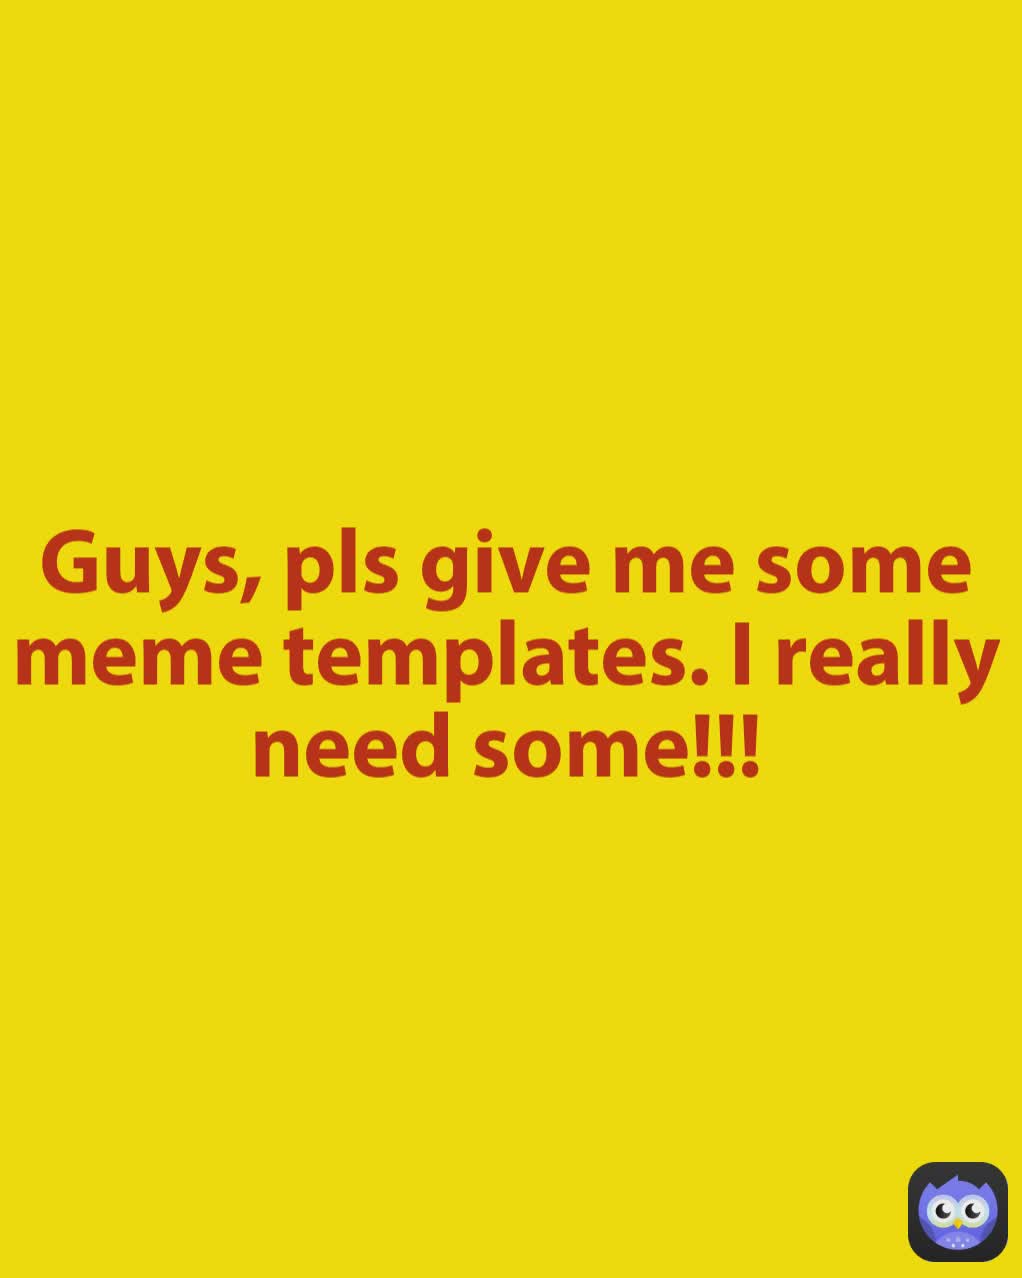 Guys, pls give me some meme templates. I really need some!!!